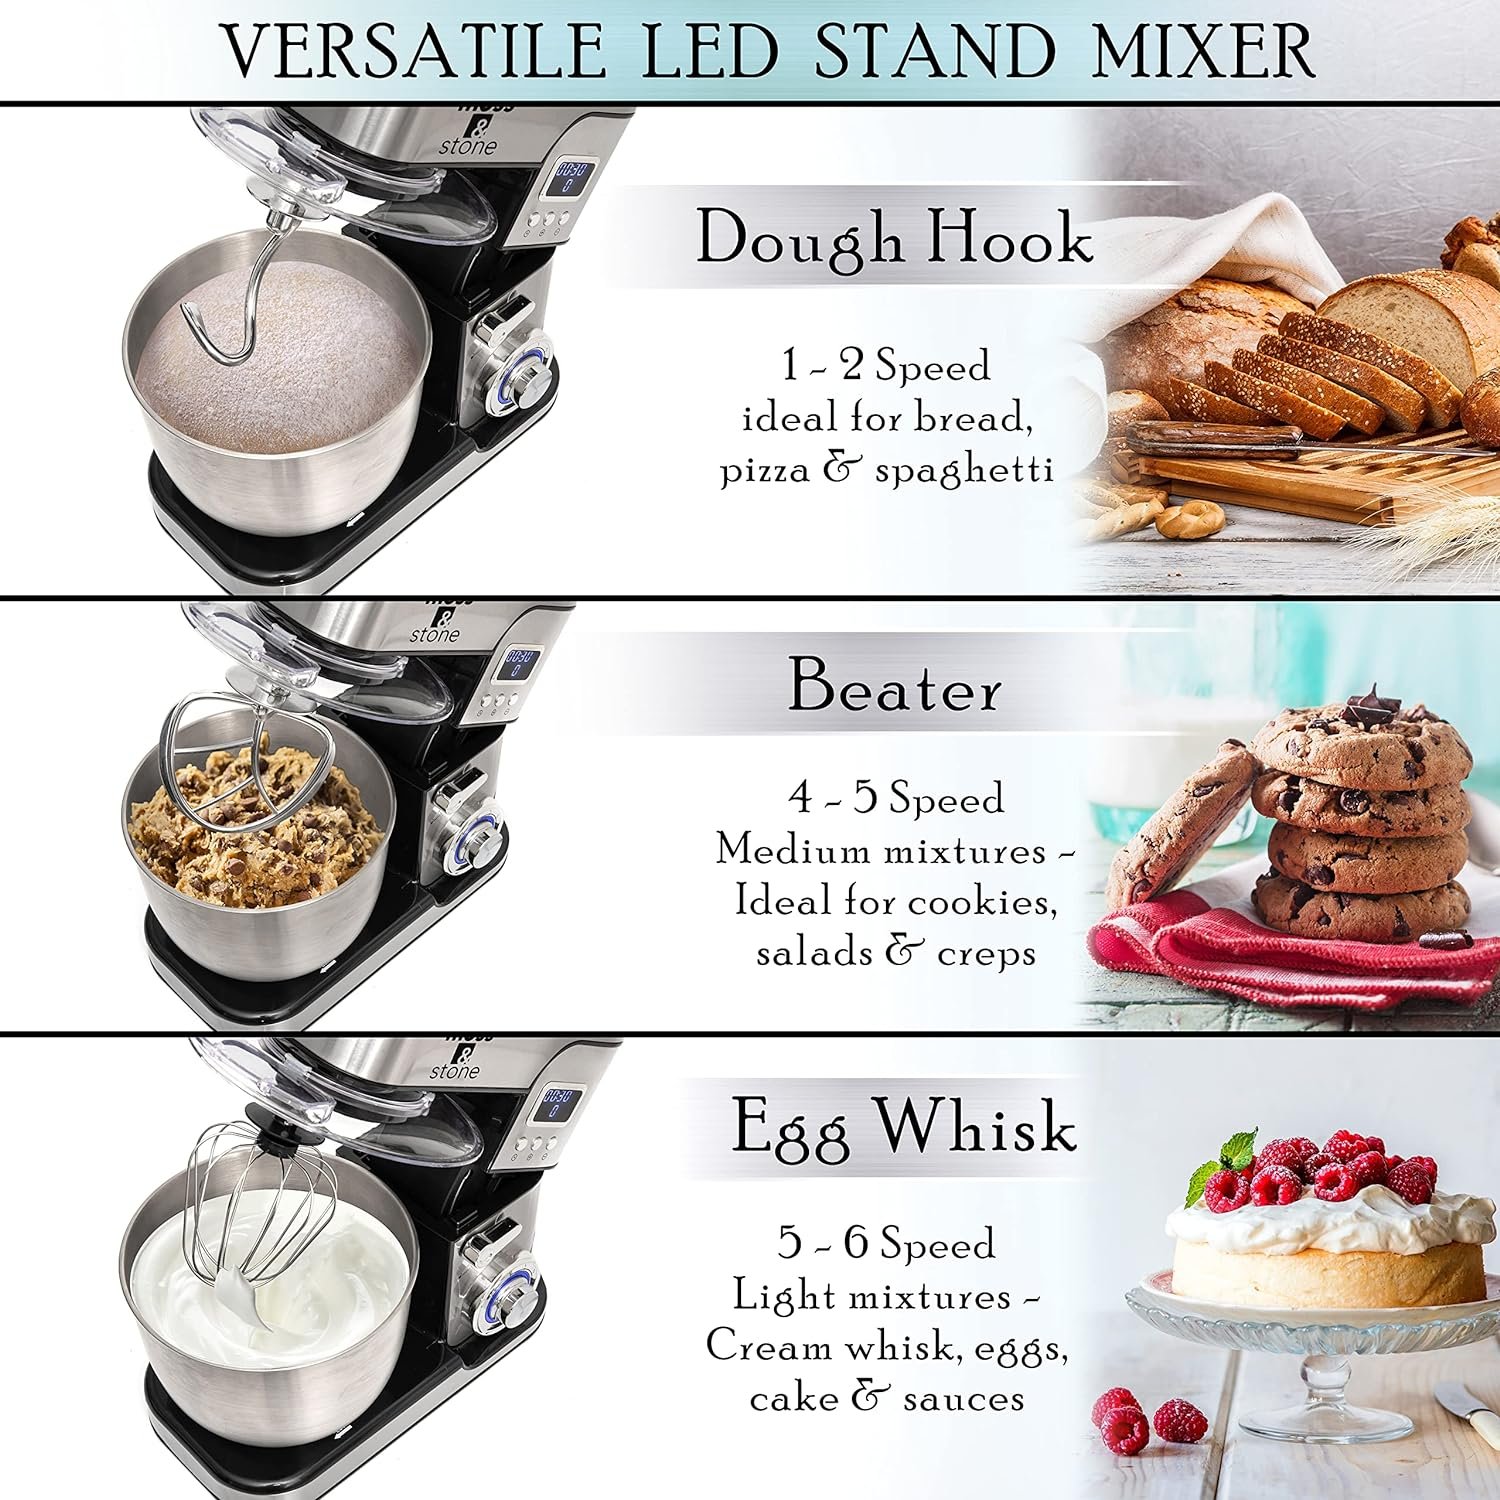 Moss  Stone Stand Mixer With Lcd Display, 6 Speed Electric Mixer With 5.5 Quart Stainless Steel Mixing Bowl, Kitchen Mixer With Dough Hook, Egg Whisk, Beater  Baking Spatula, Food Mixer With Timer